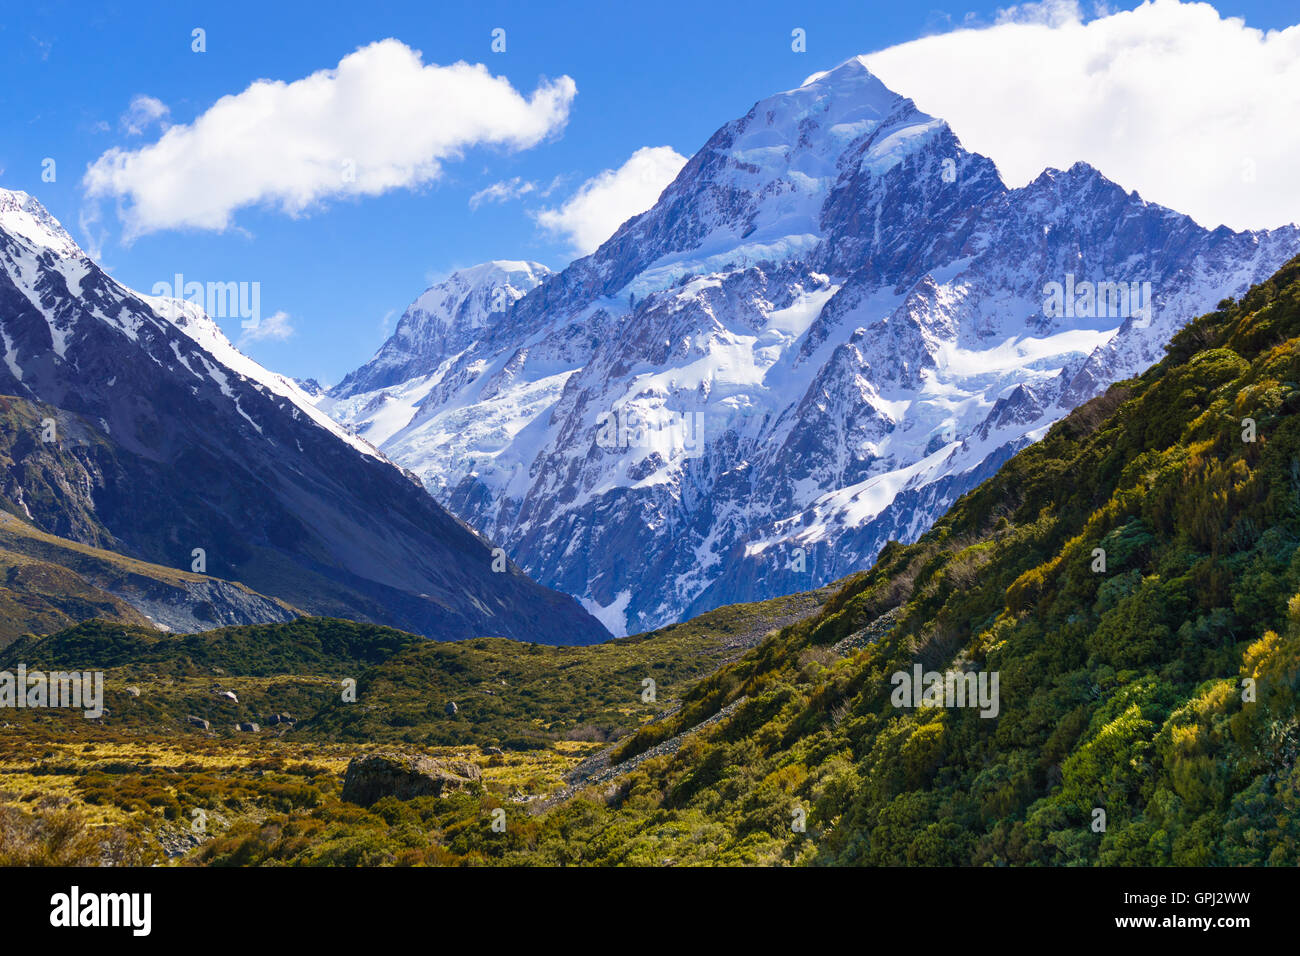 View of Mount Cook from Hooker Valley trail, New Zealand Stock Photo